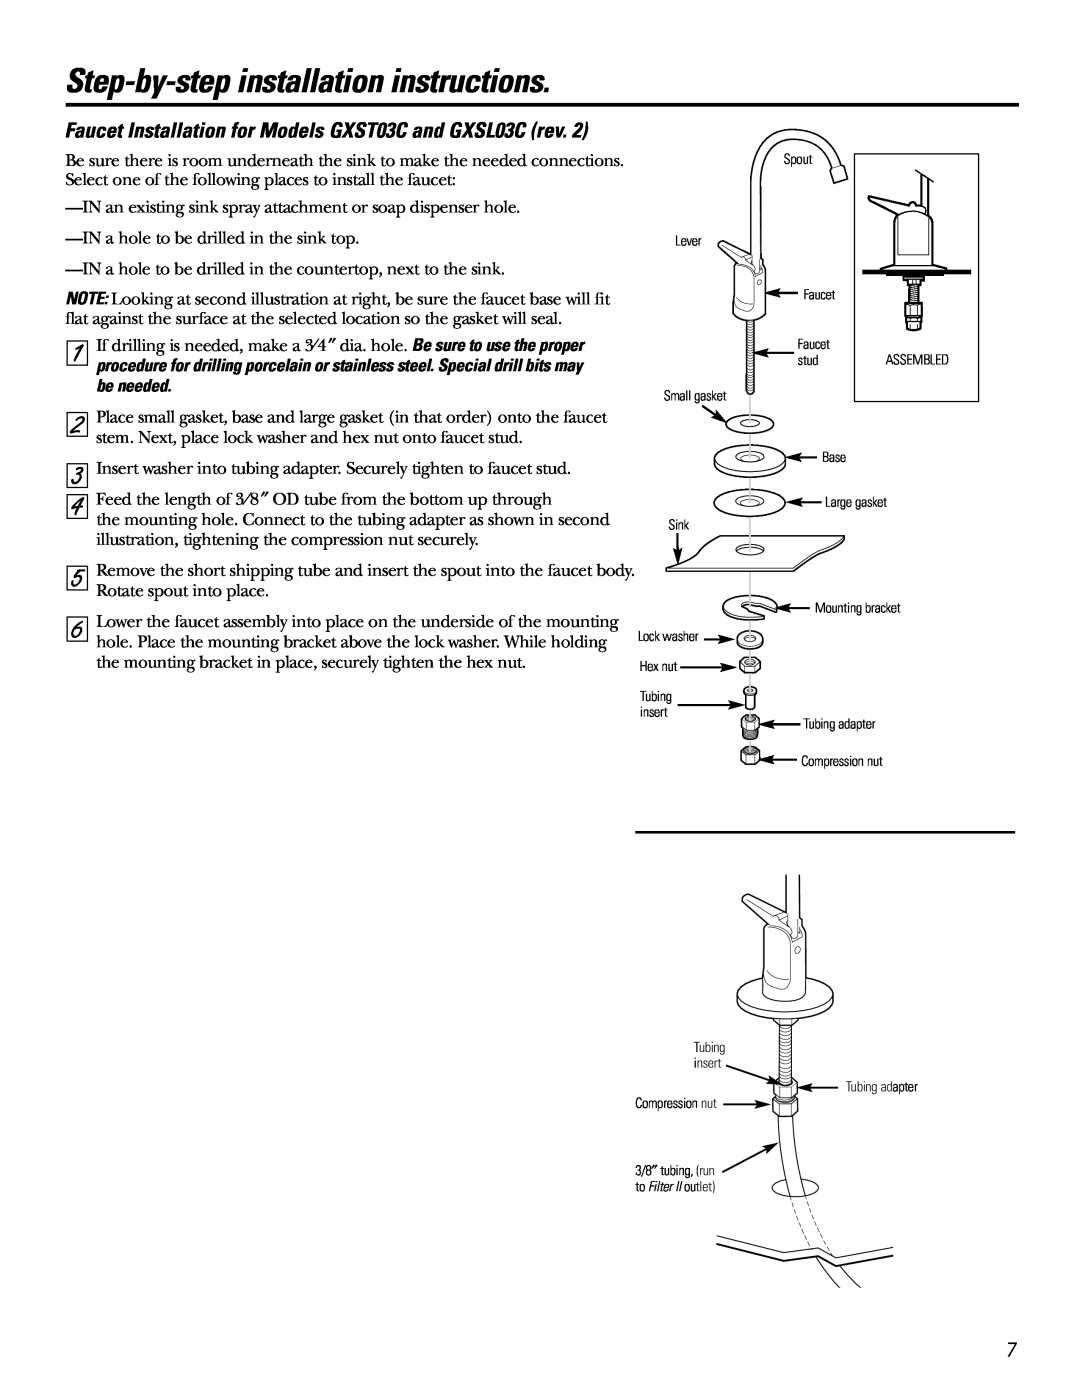 GE GXSV10C Step-by-step installation instructions, Faucet Installation for Models GXST03C and GXSL03C rev, be needed 